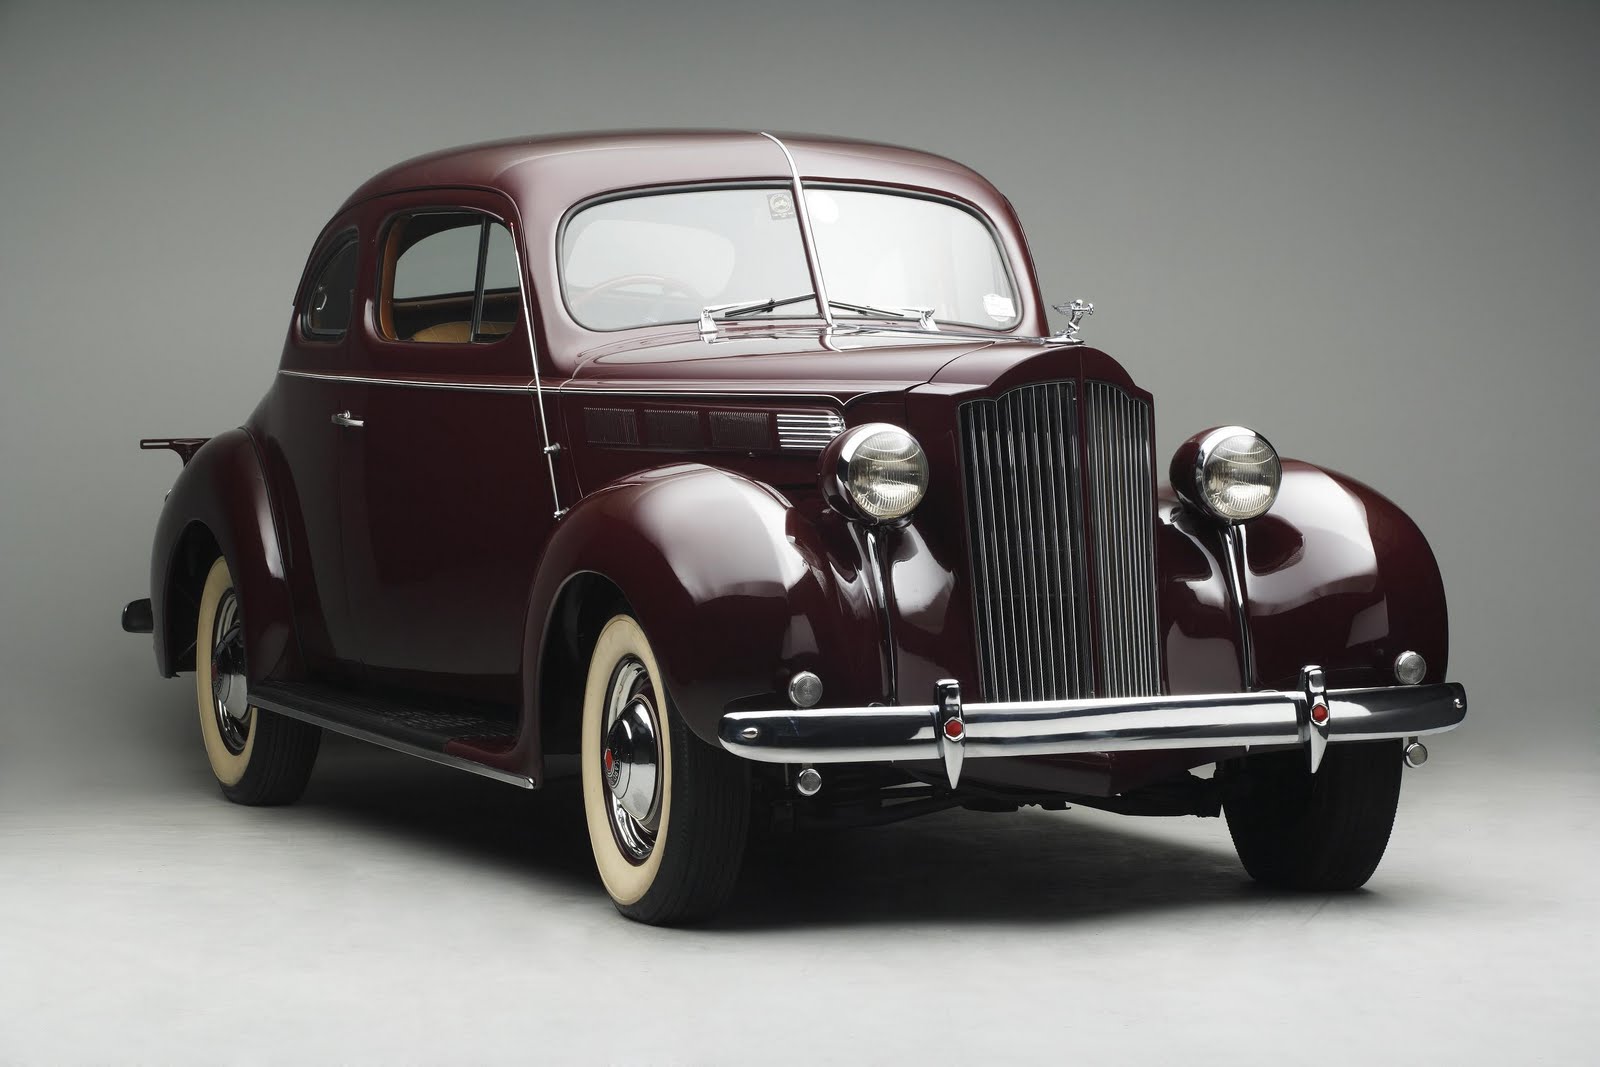 Packard Six club coupe Photo Gallery: Photo #06 out of 11, Image ...